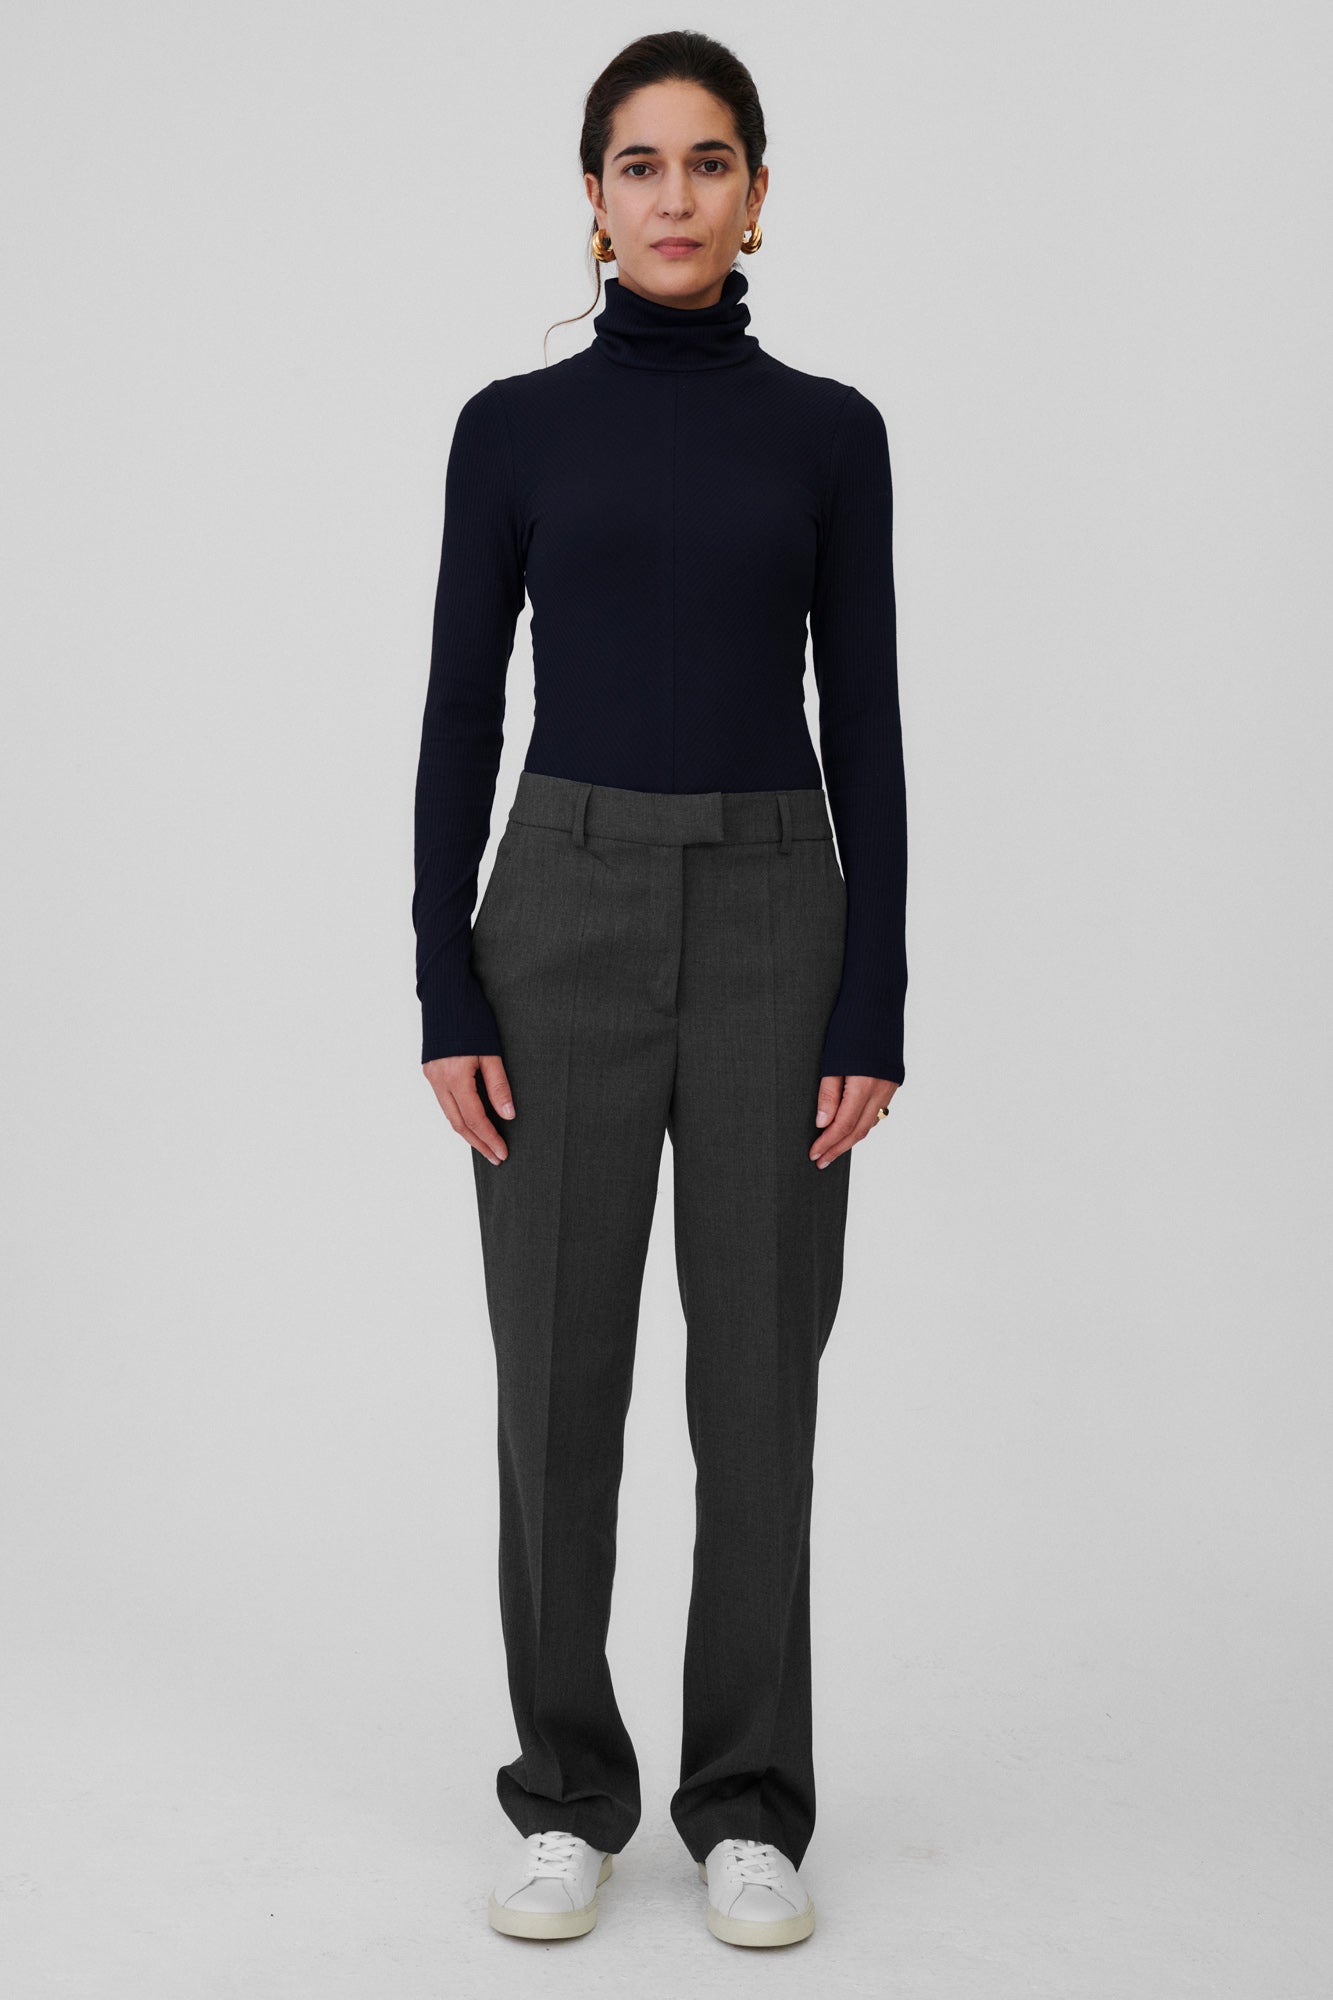 Wool blend trousers / 05 / 15 / granite grey *bodysuit-in-organic-cotton-01-34-night-blue* ?The model is 176cm tall and wears size S?